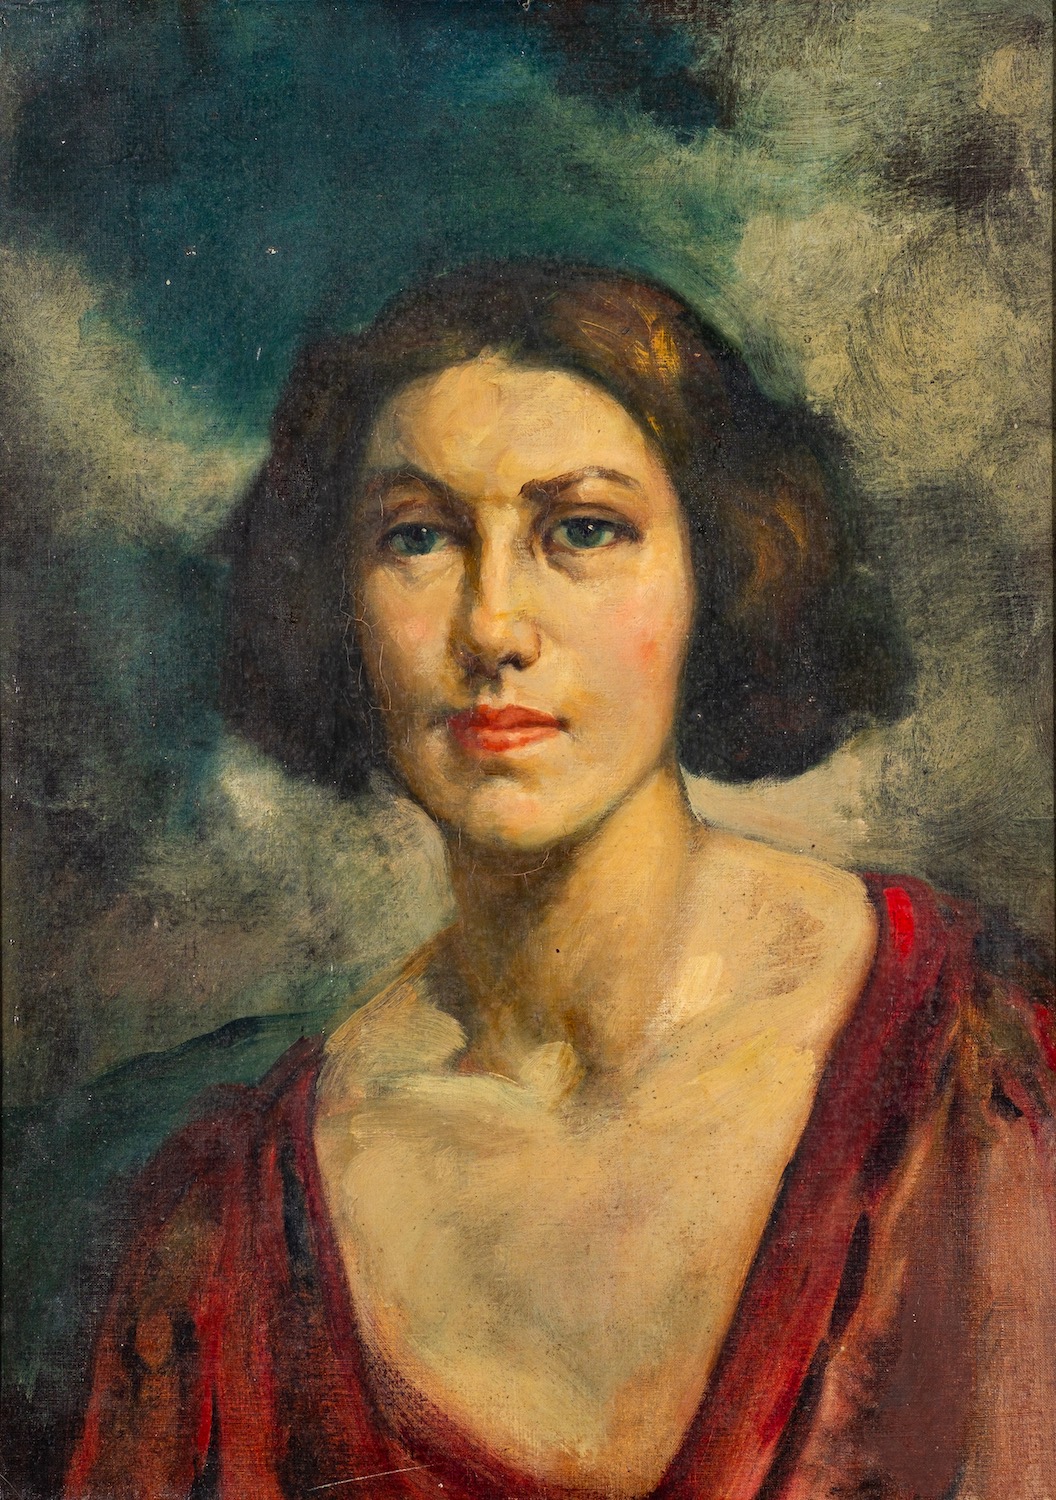 British School (20th Century) - Head and shoulder study of a young woman in a red dress - Oil on